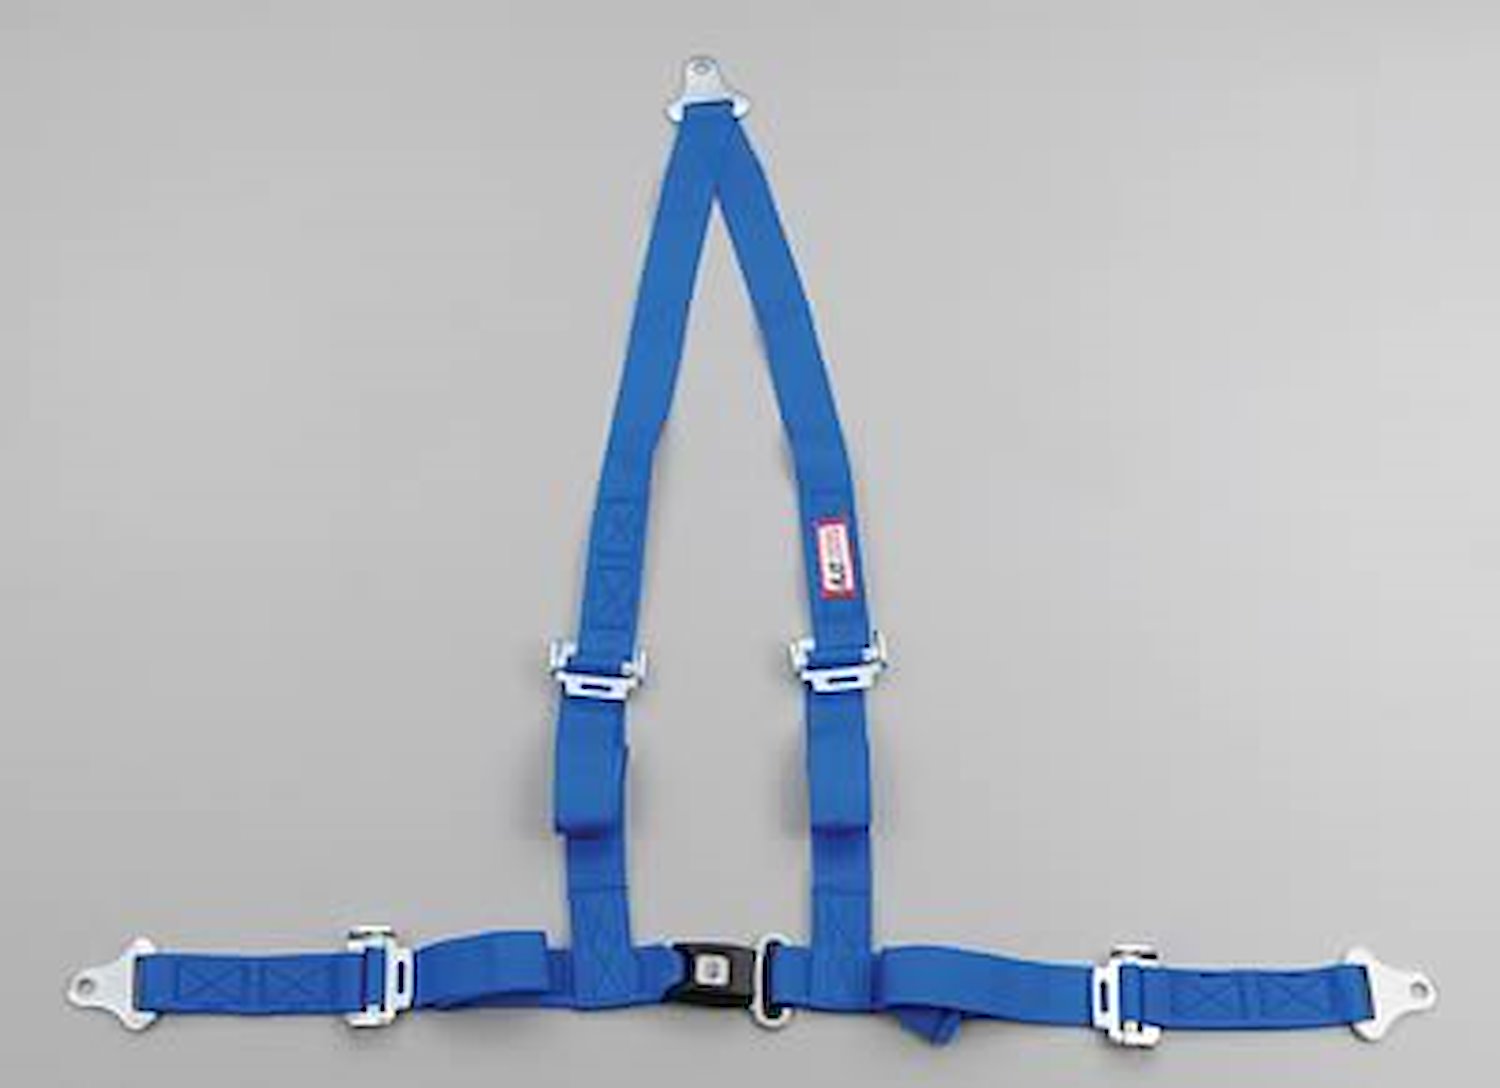 NON-SFI B&T HARNESS 2 PULL DOWN Lap Belt 2 S. H. V ROLL BAR Mount ALL SNAP ENDS w/STERNUM STRAP BLUE